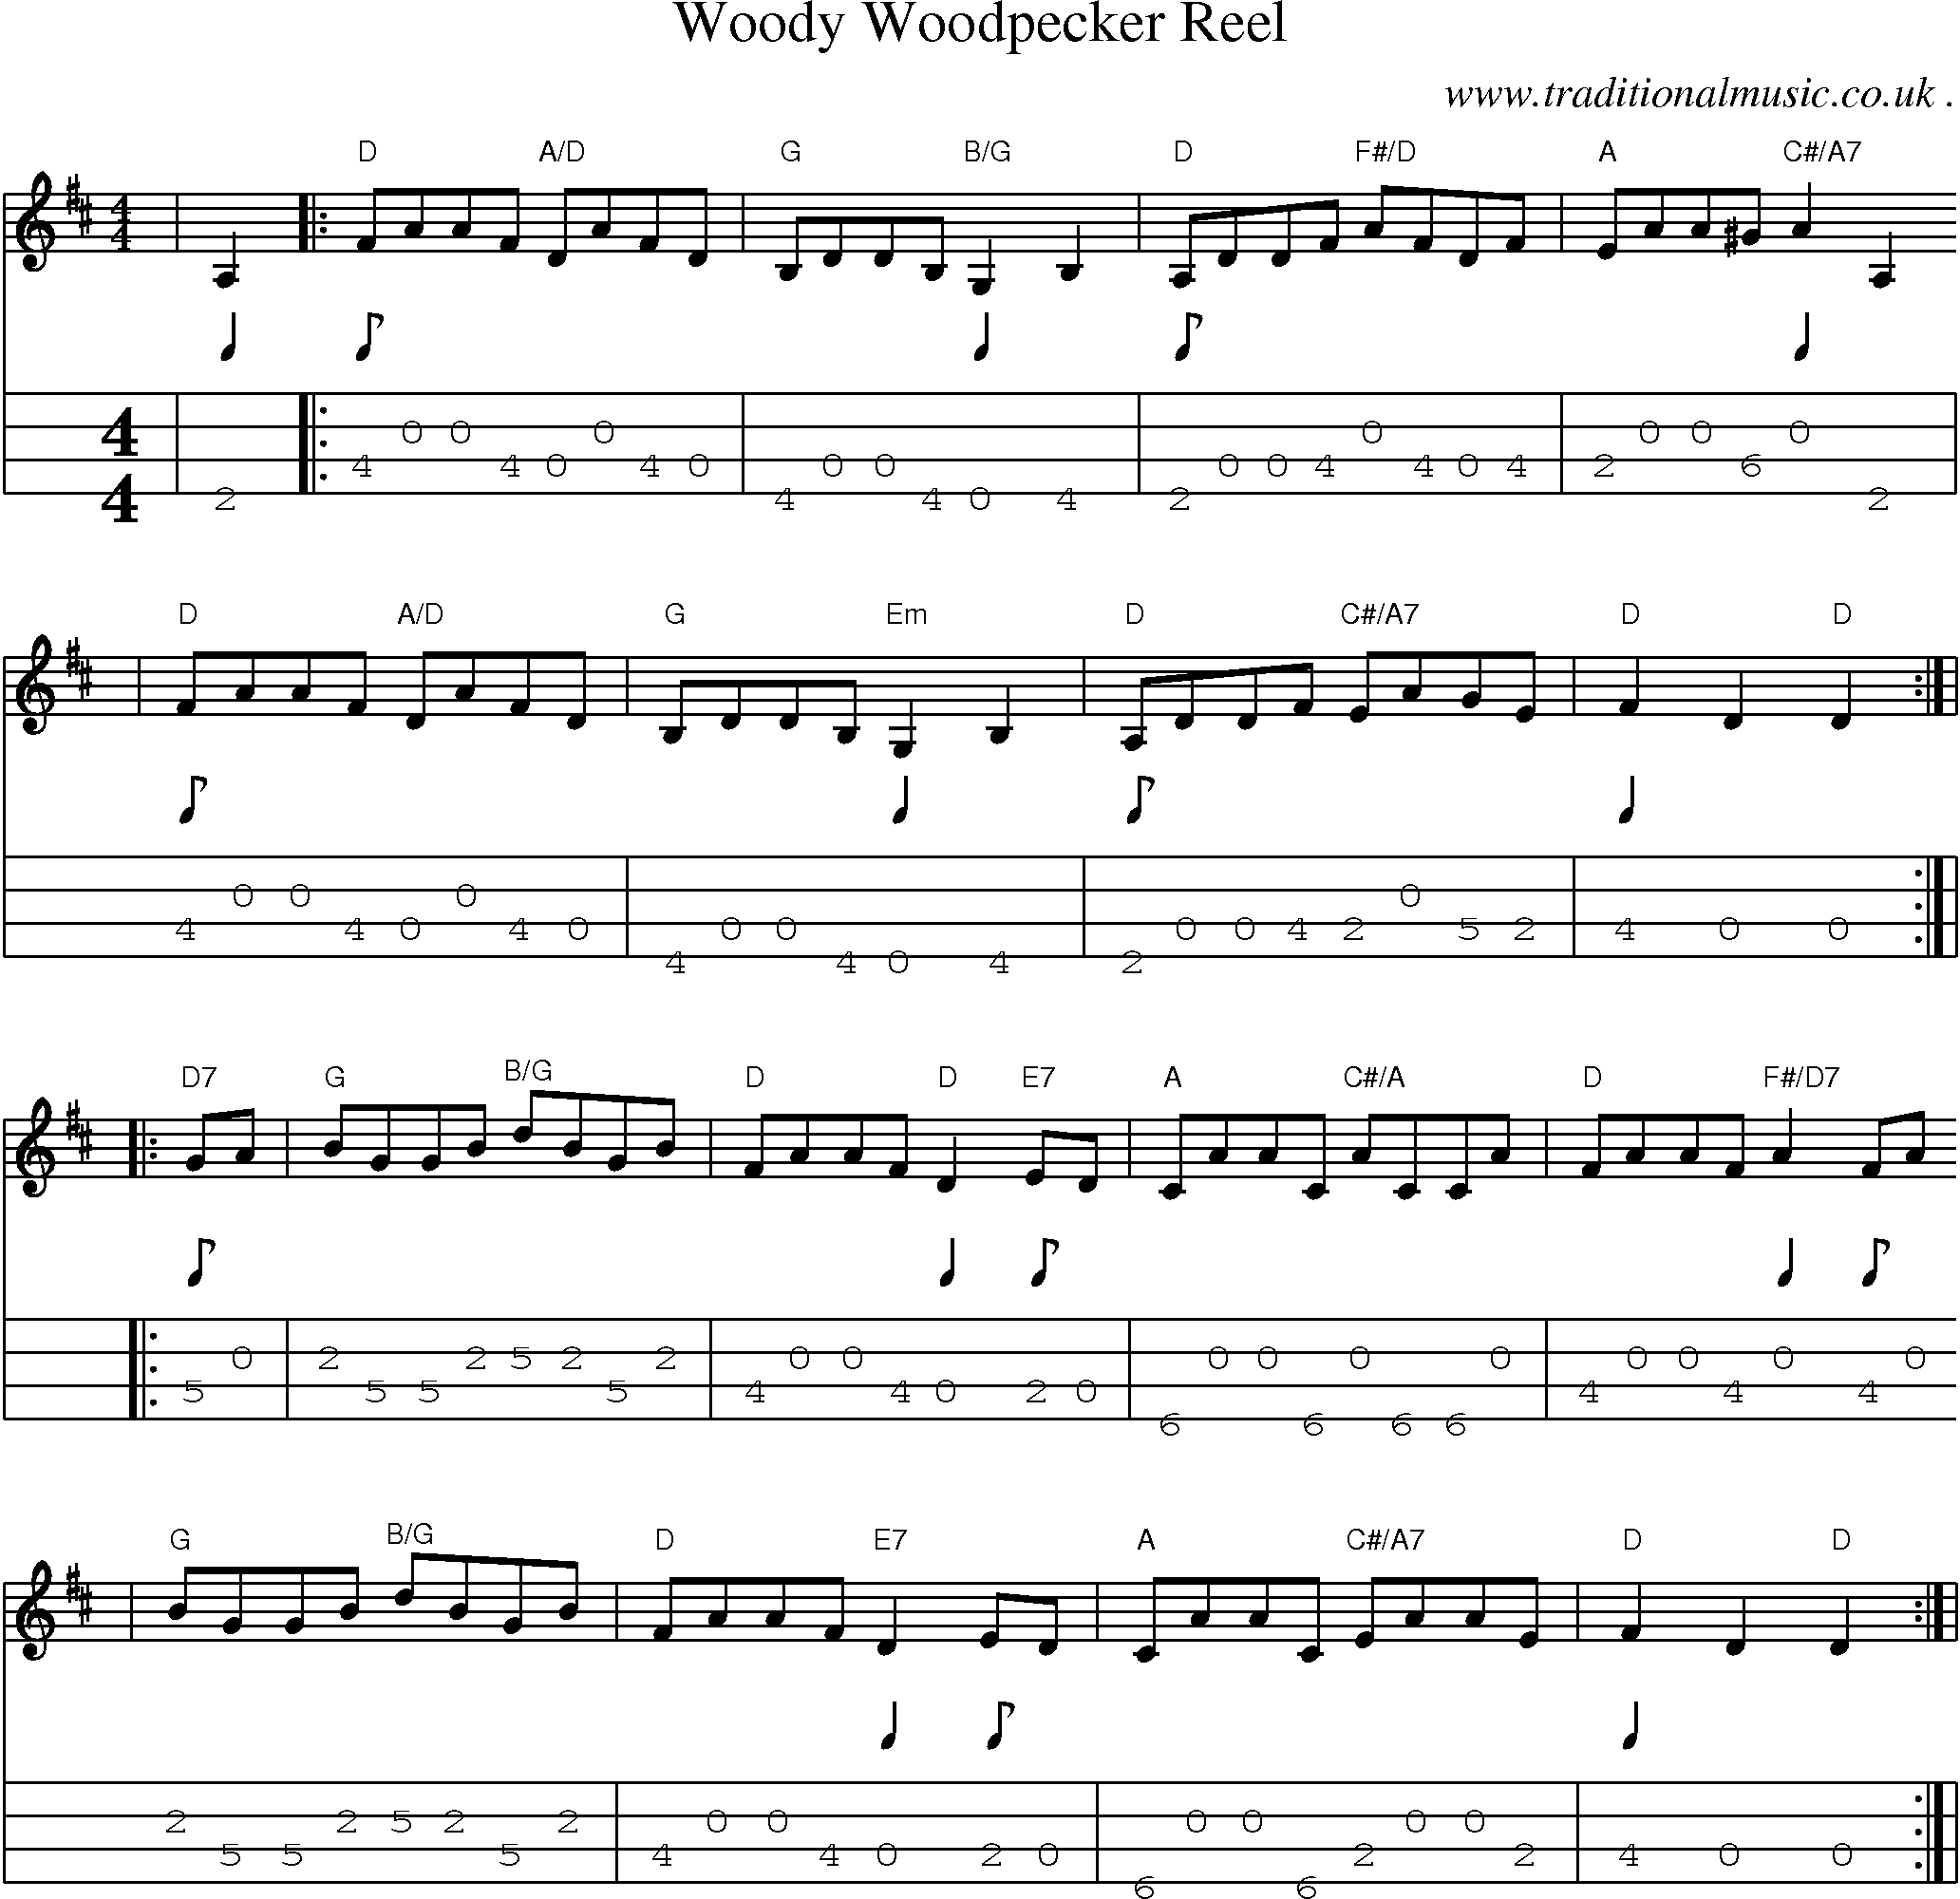 Music Score and Mandolin Tabs for Woody Woodpecker Reel